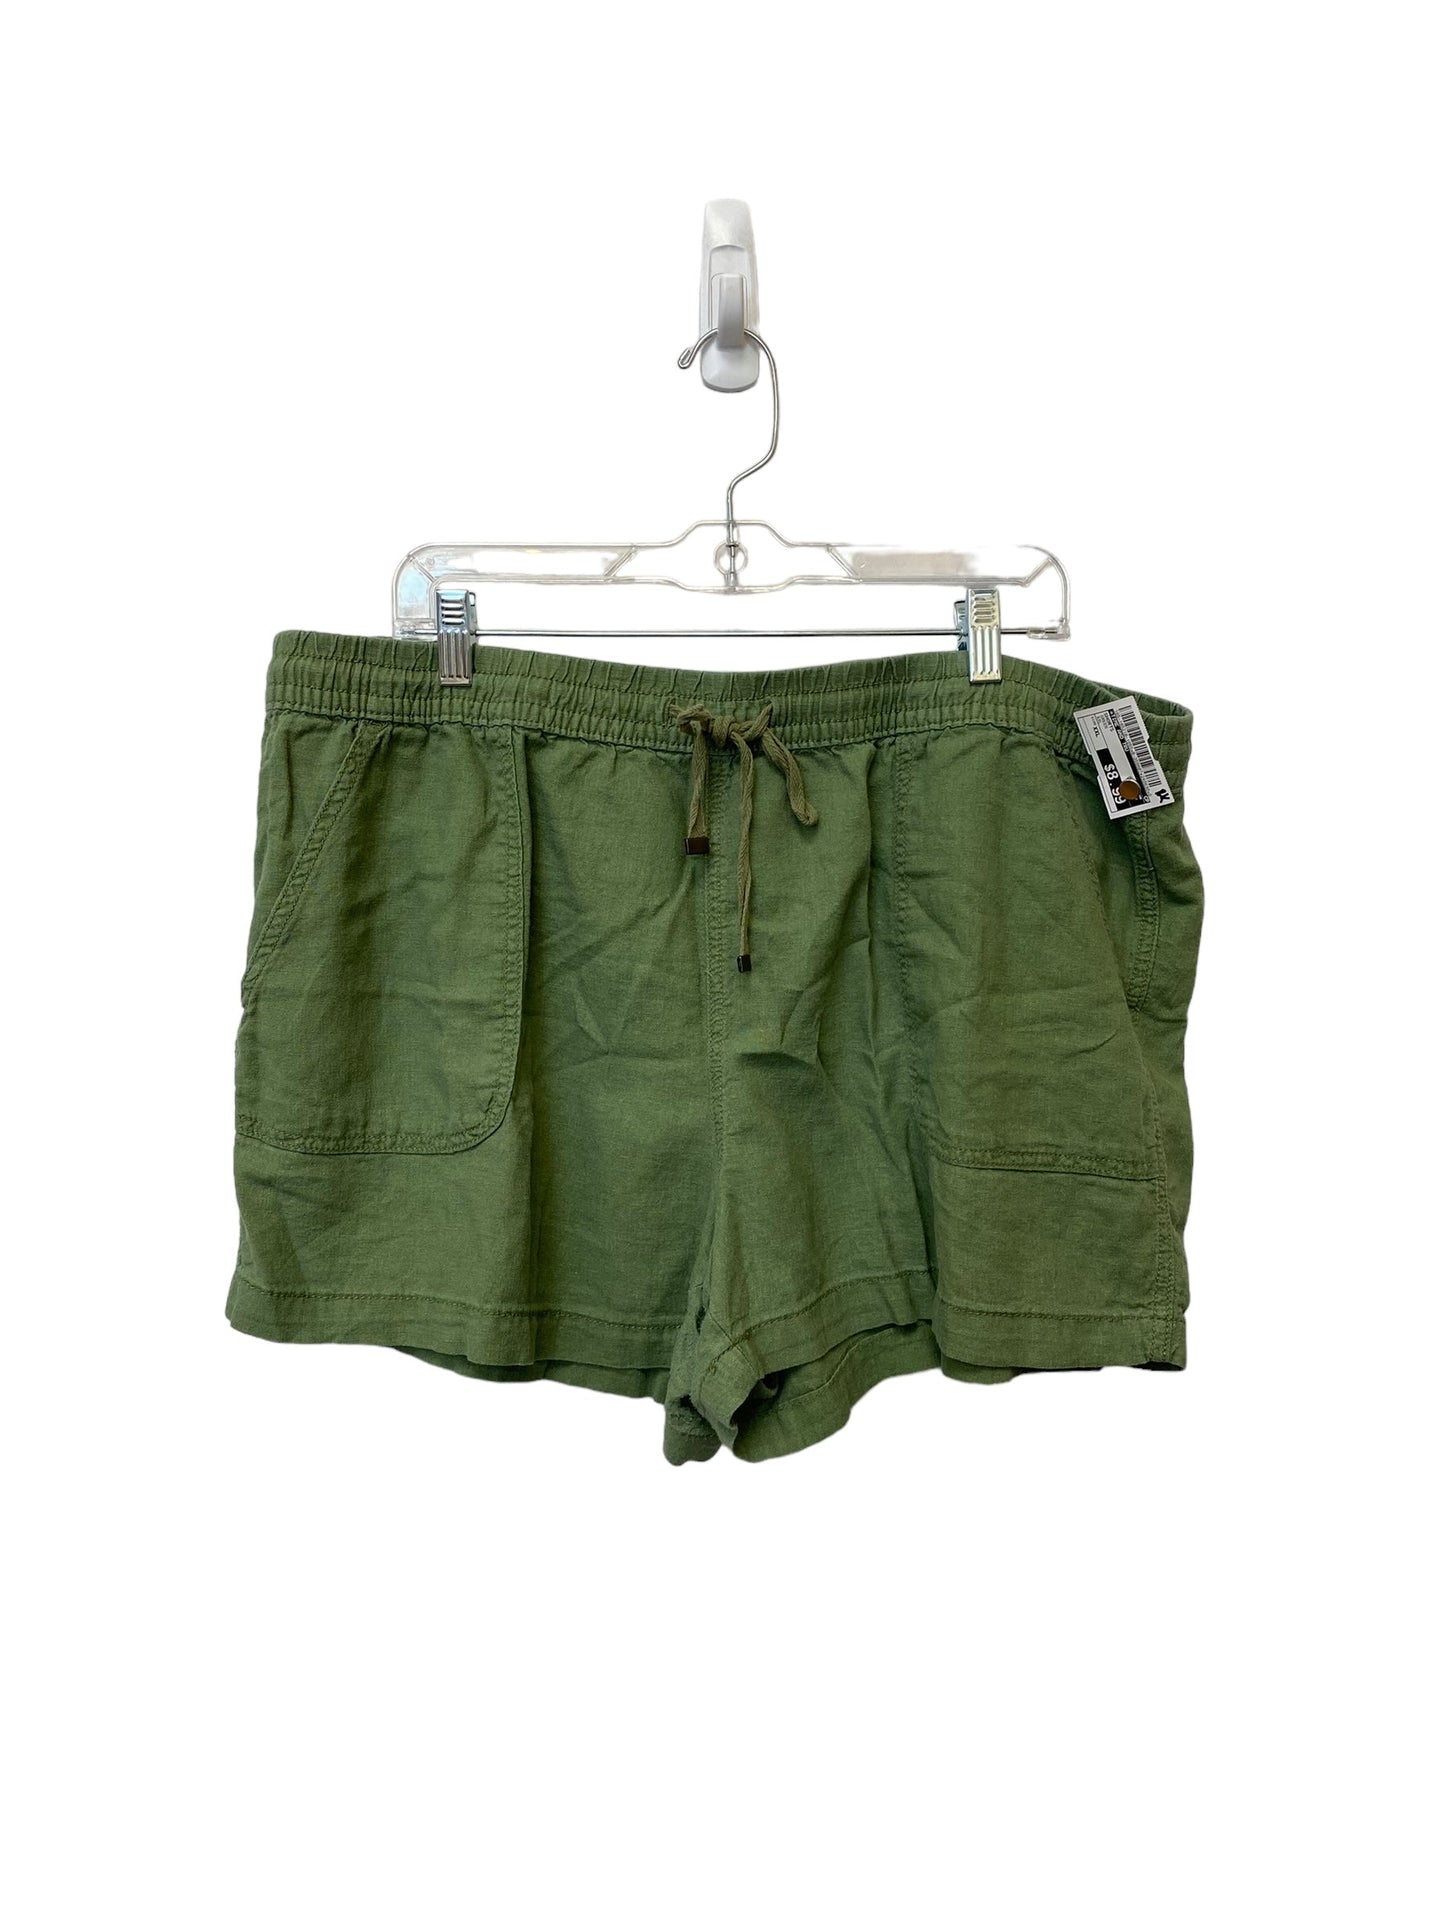 Green Shorts Time And Tru, Size Xxl